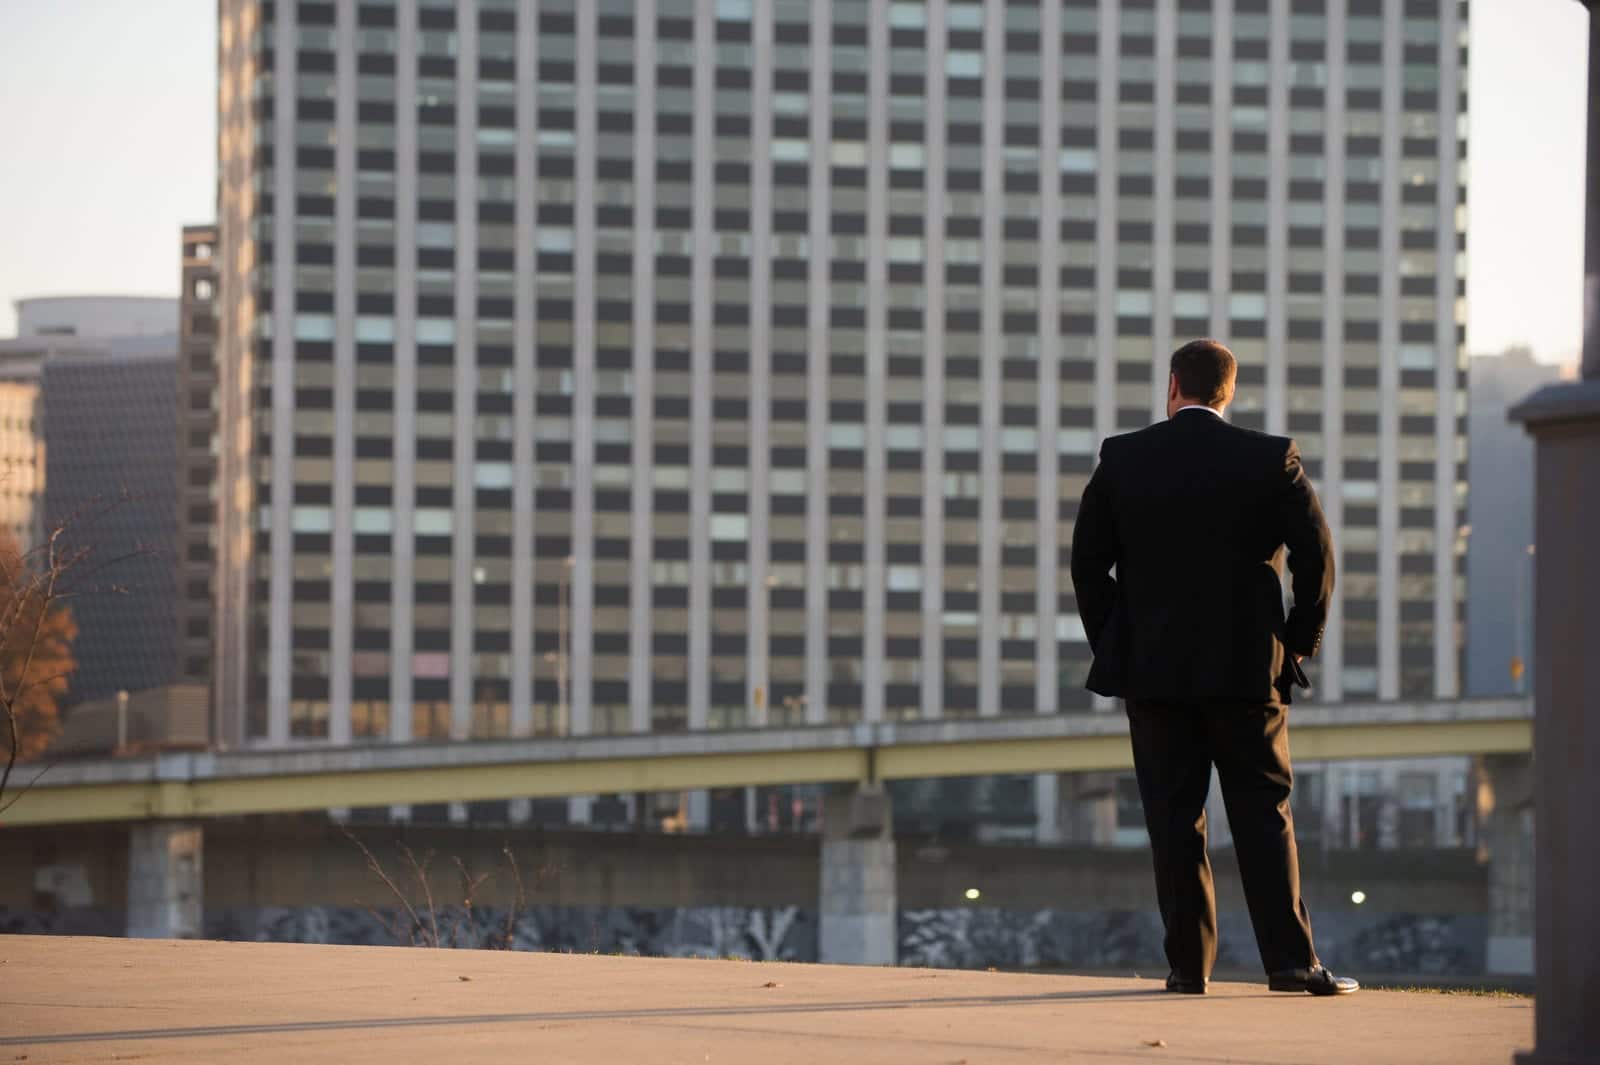 A groom stands on the north shore of the Allegheny River with Gateway Center visible in the background.